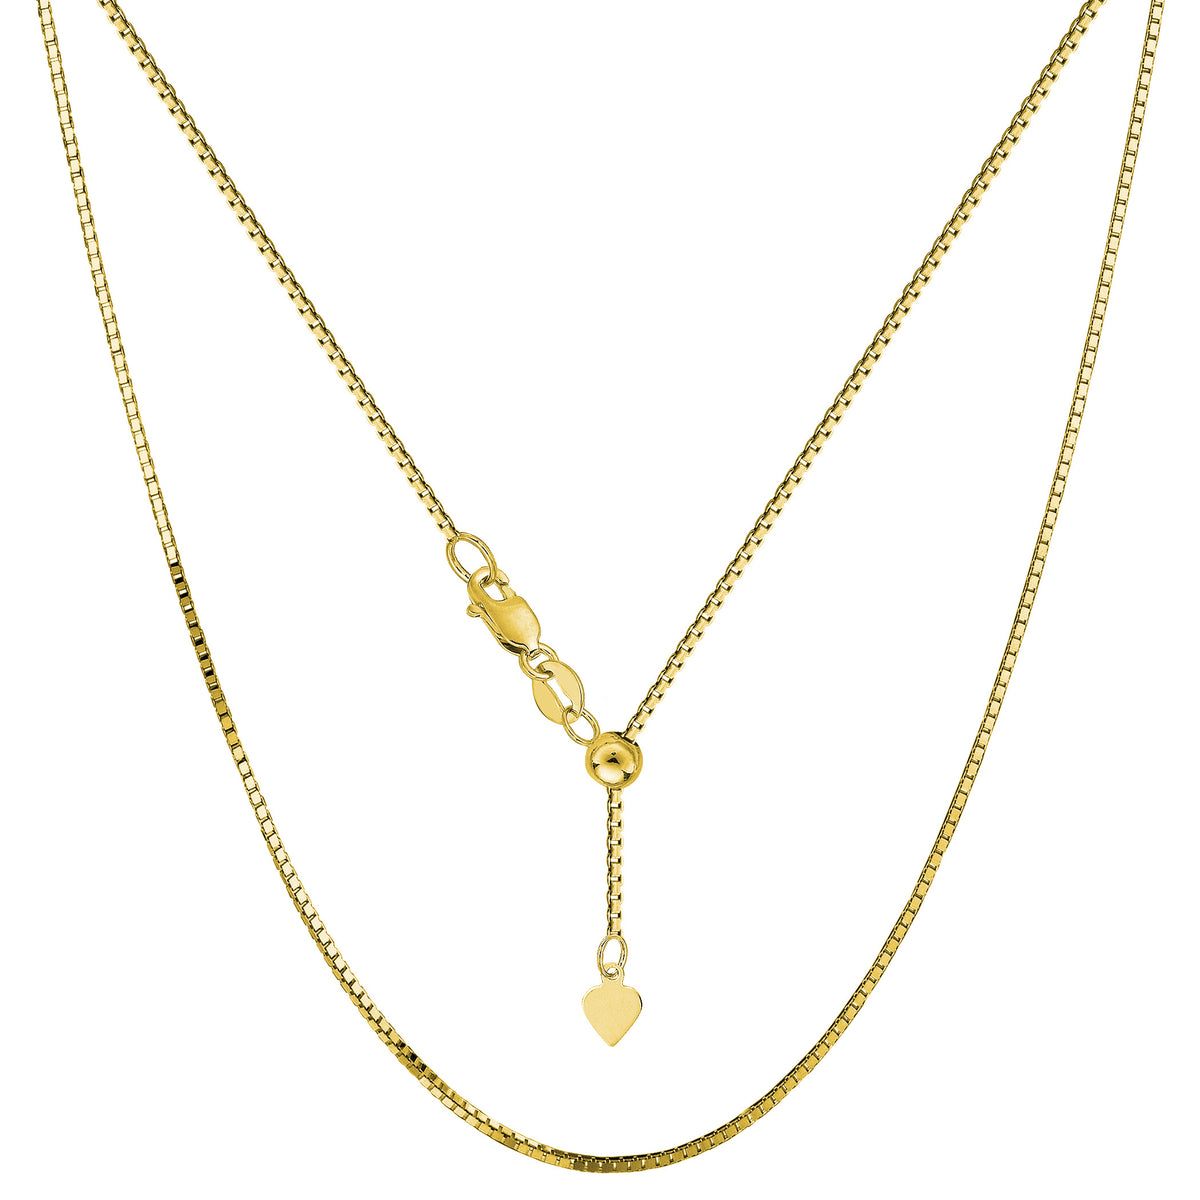 10k Yellow Gold Adjustable Box Link Chain Necklace, 0.85mm, 22"